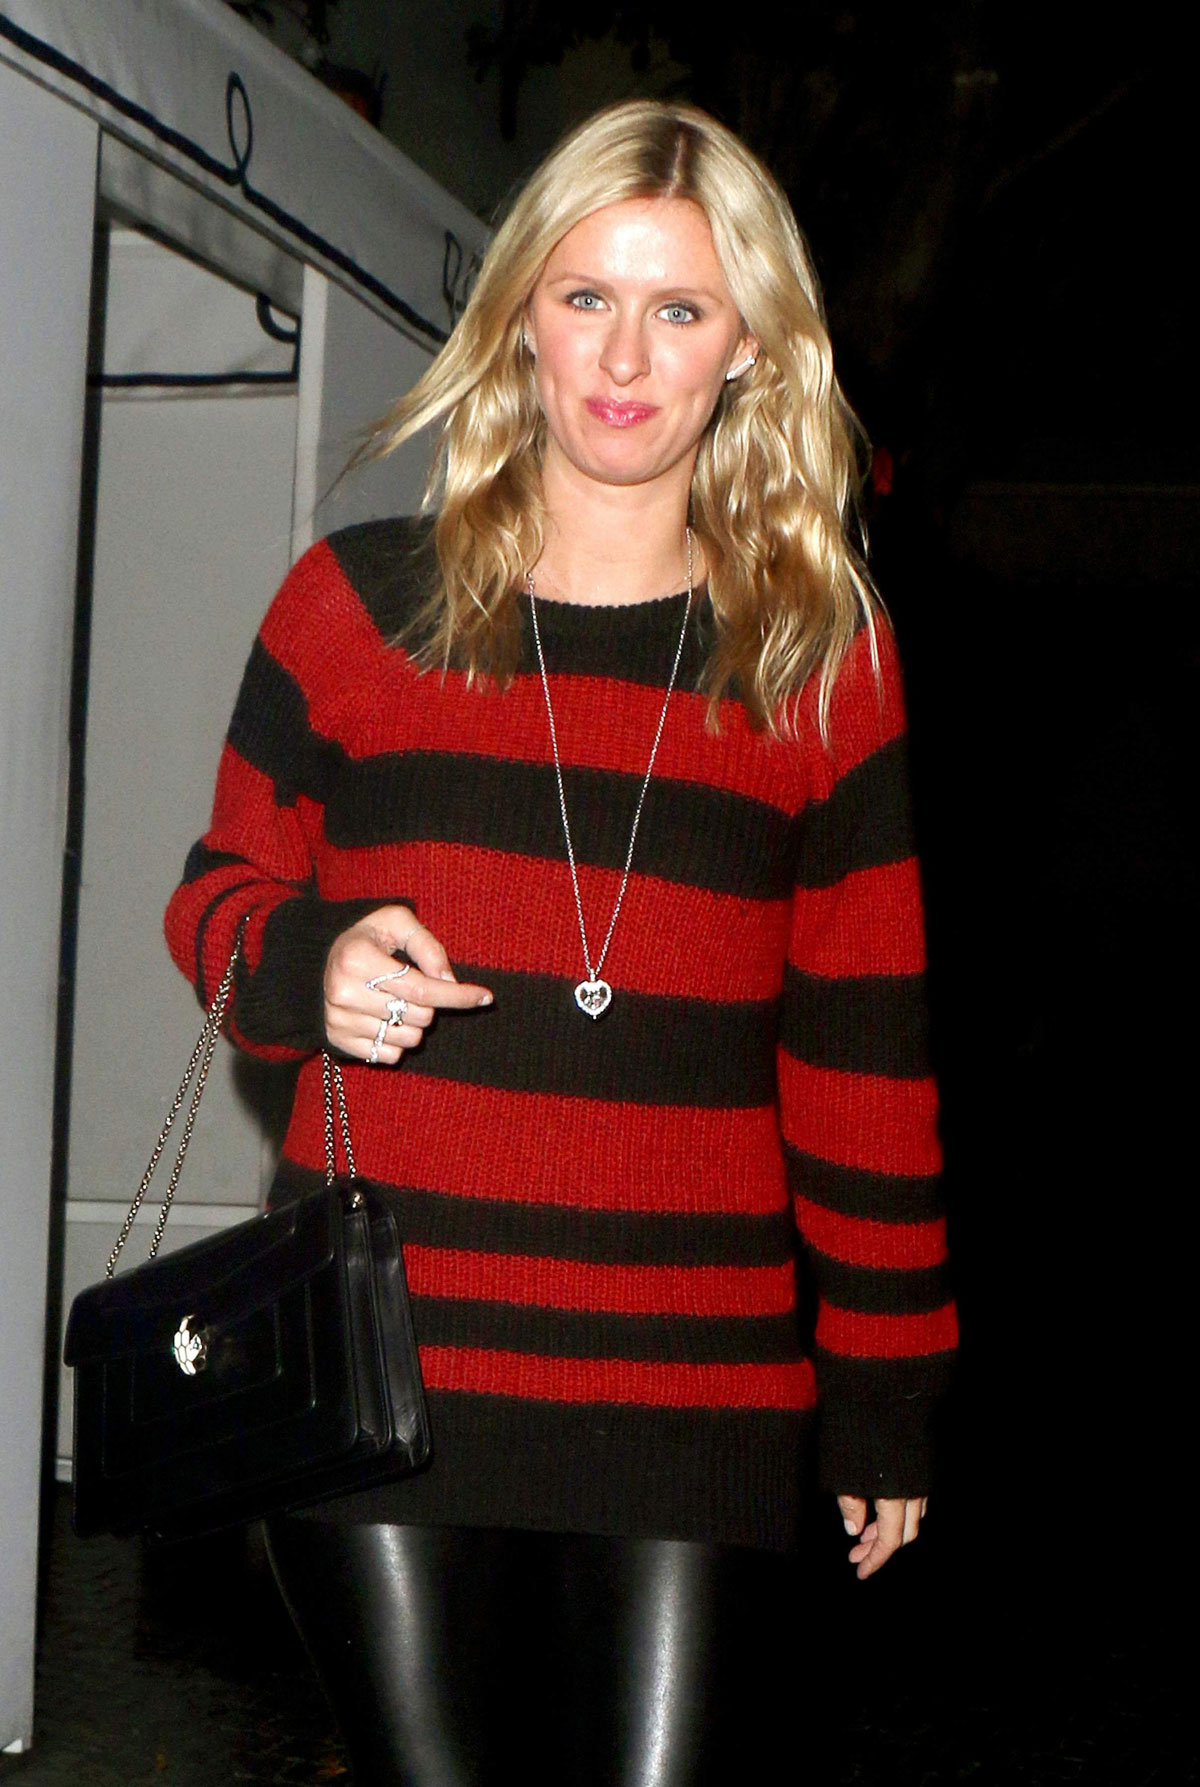 Nicky Hilton leaving Chateau Marmont restaurant